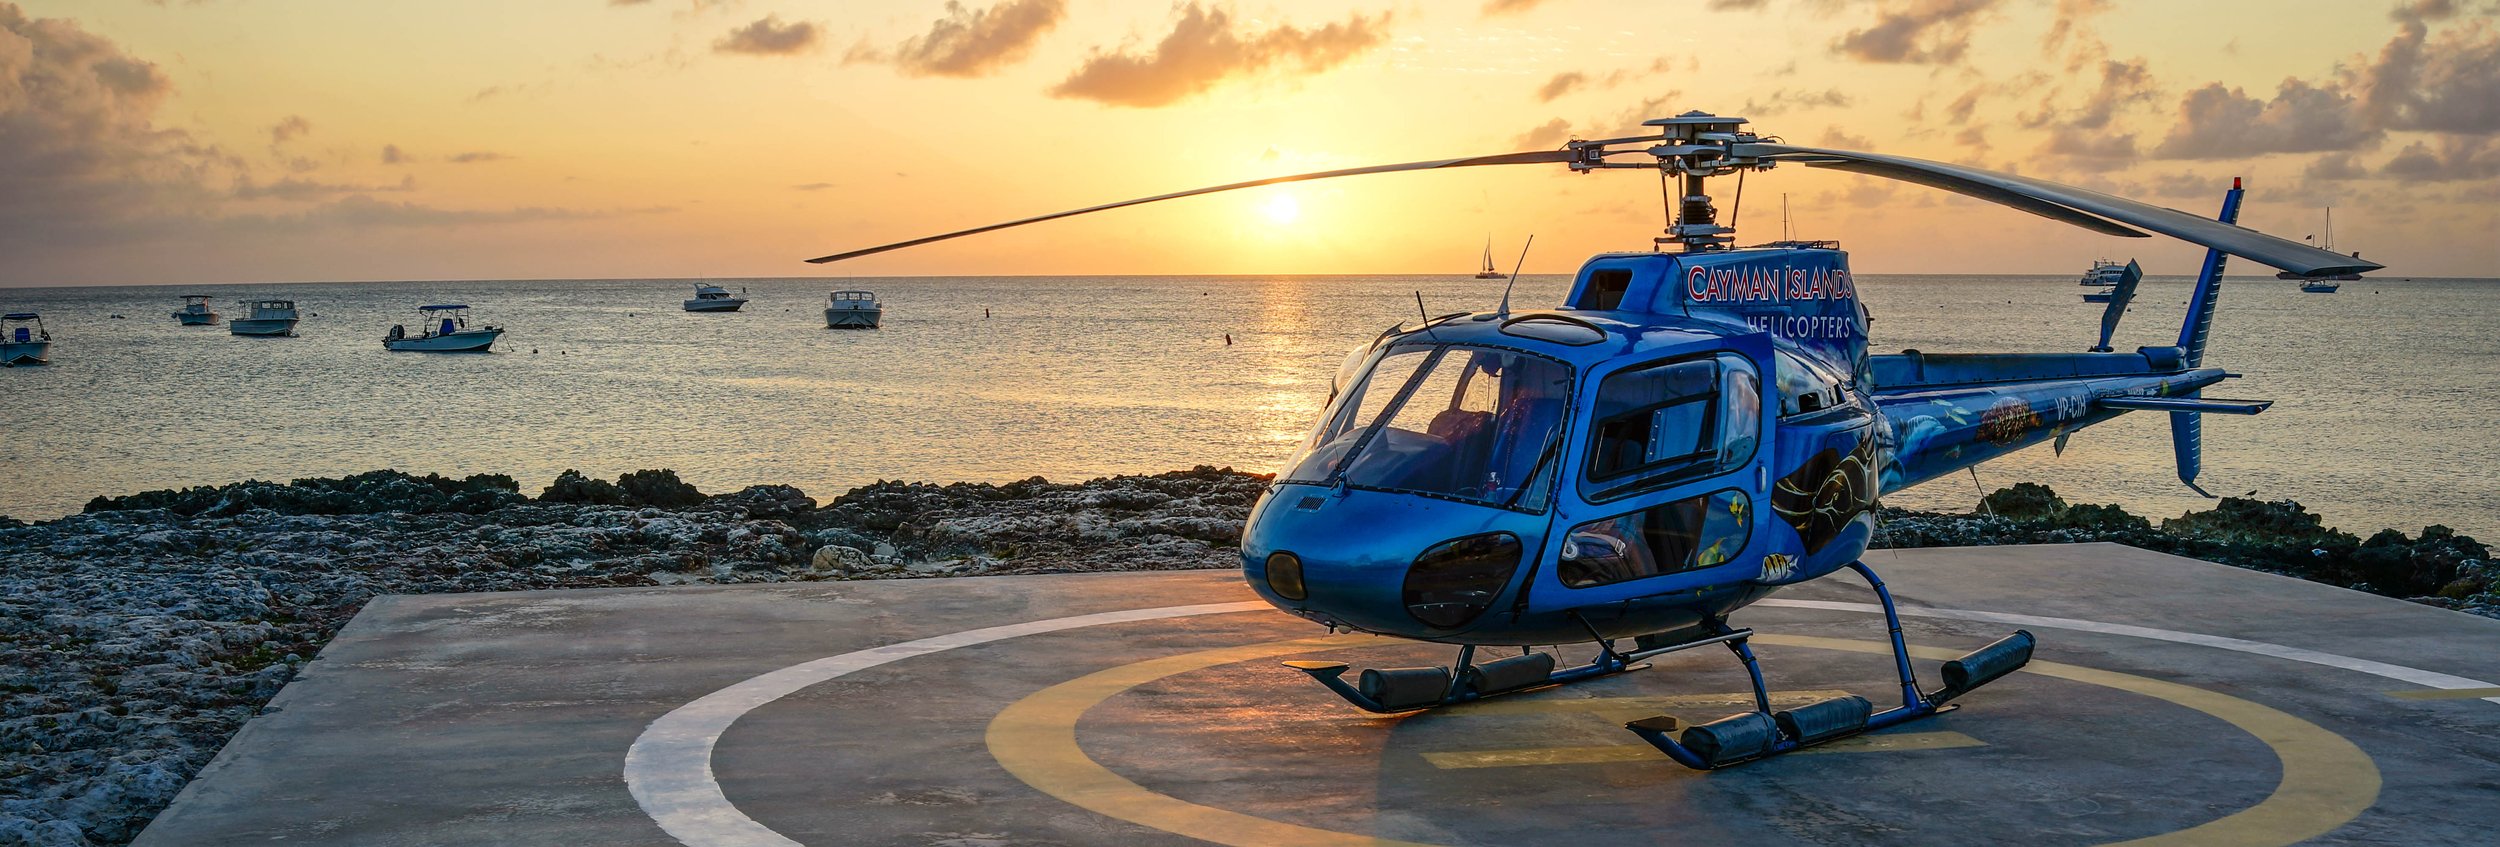 cayman islands helicopters tours